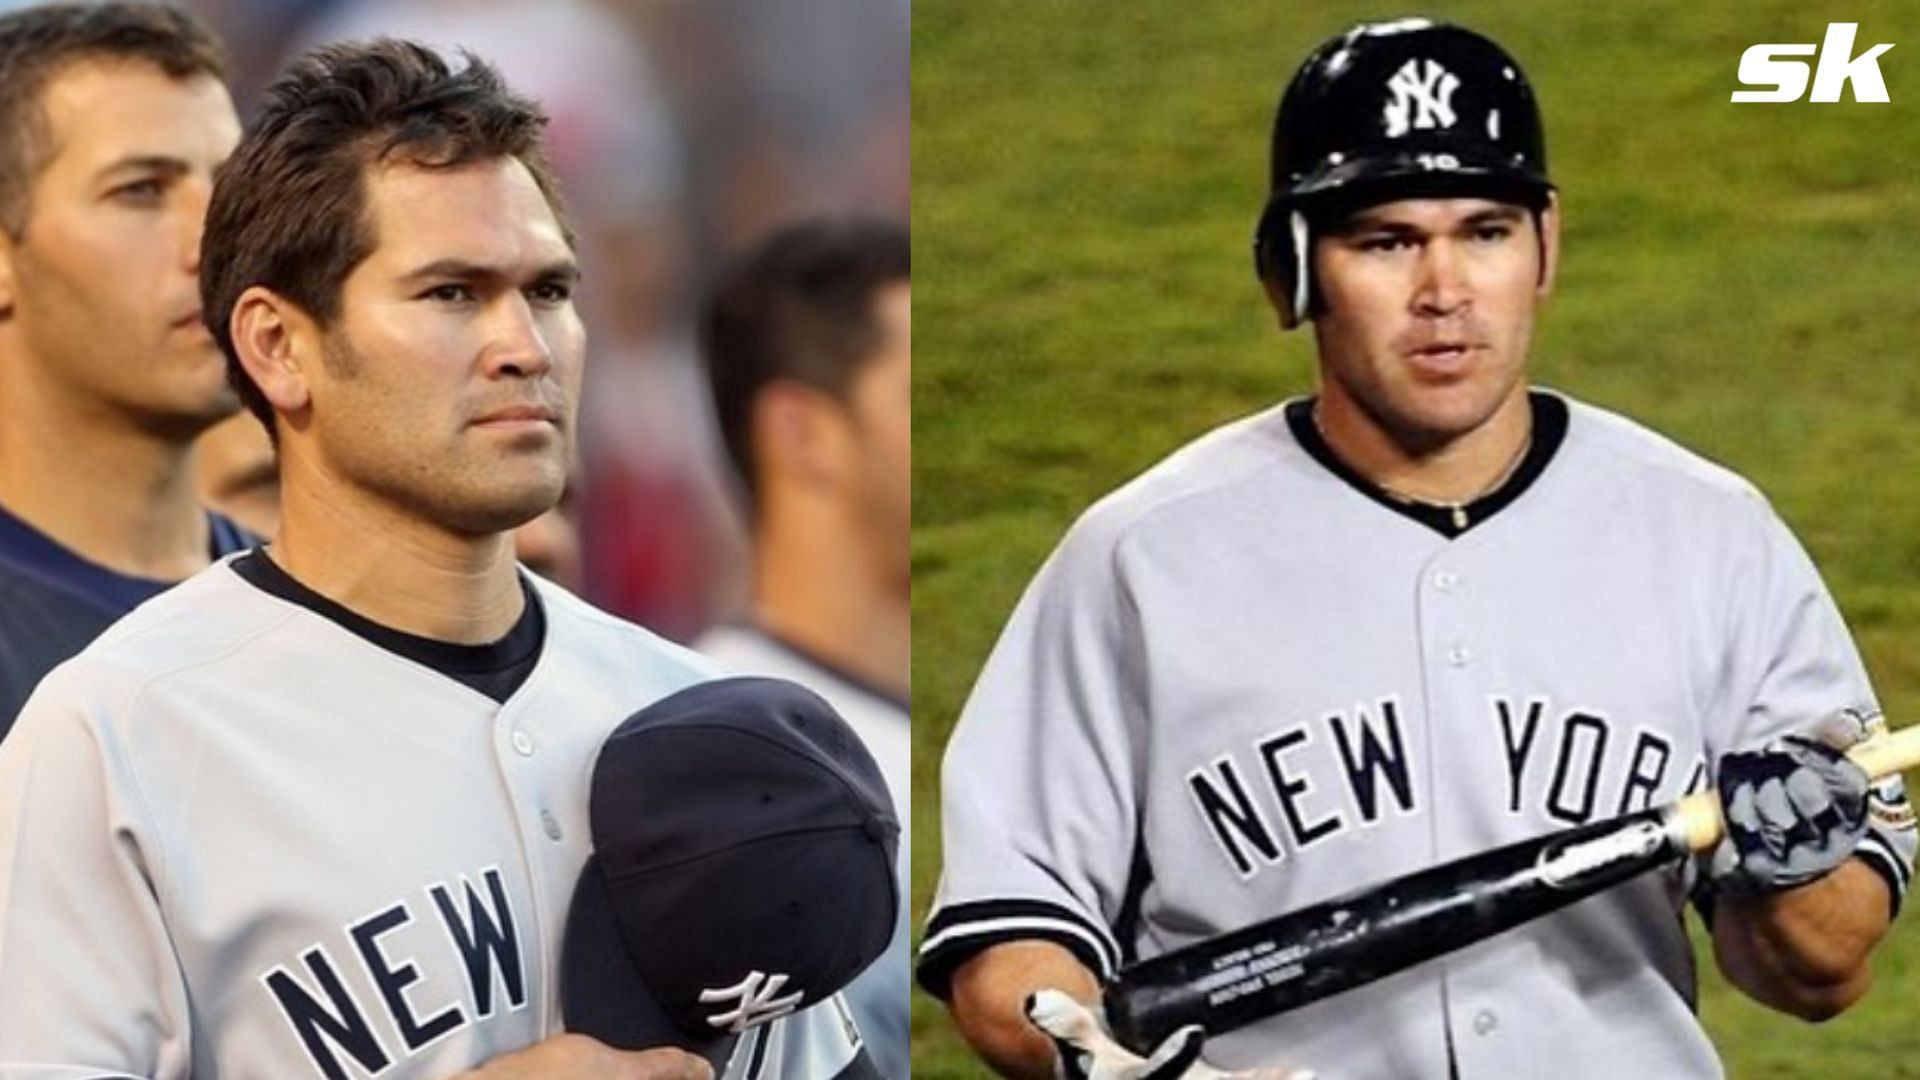 Johnny Damon during his New York Yankee days, via his personal Instagram 